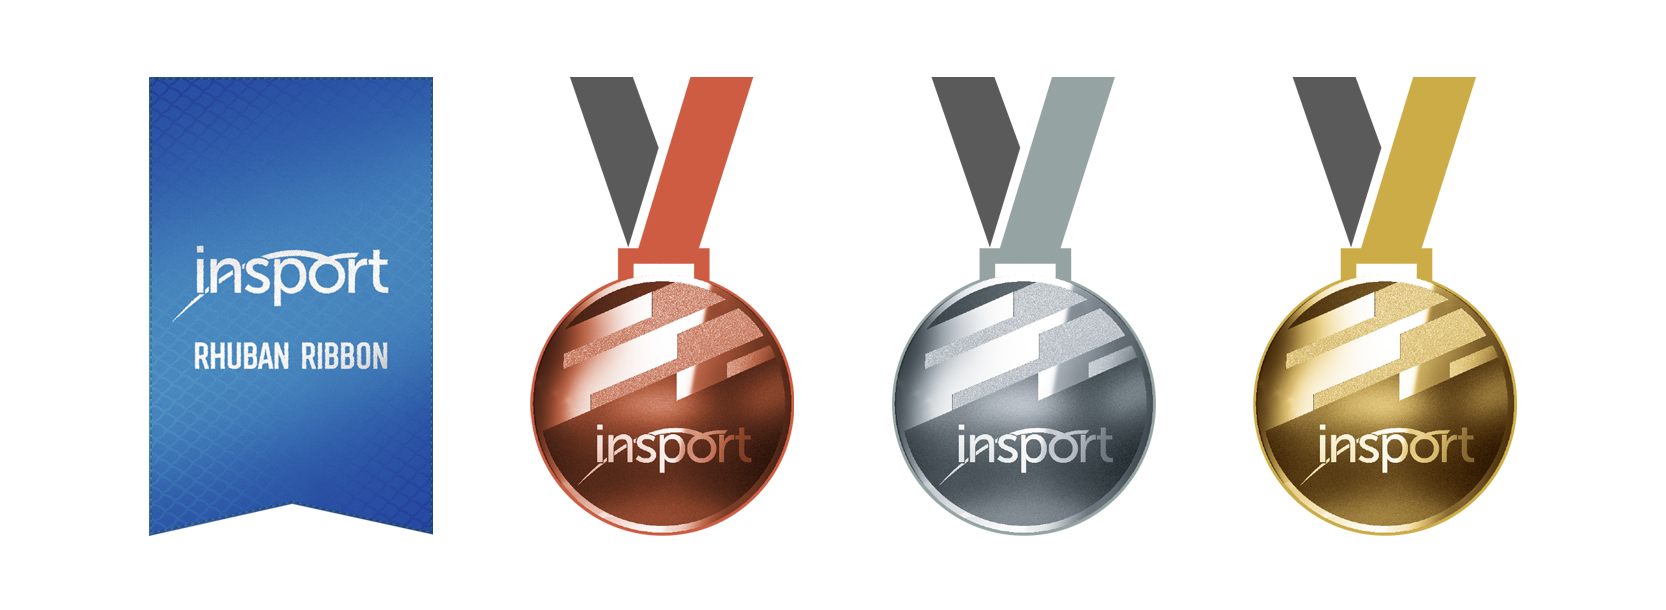 insport Ribbon, Bronze, Silver and Gold